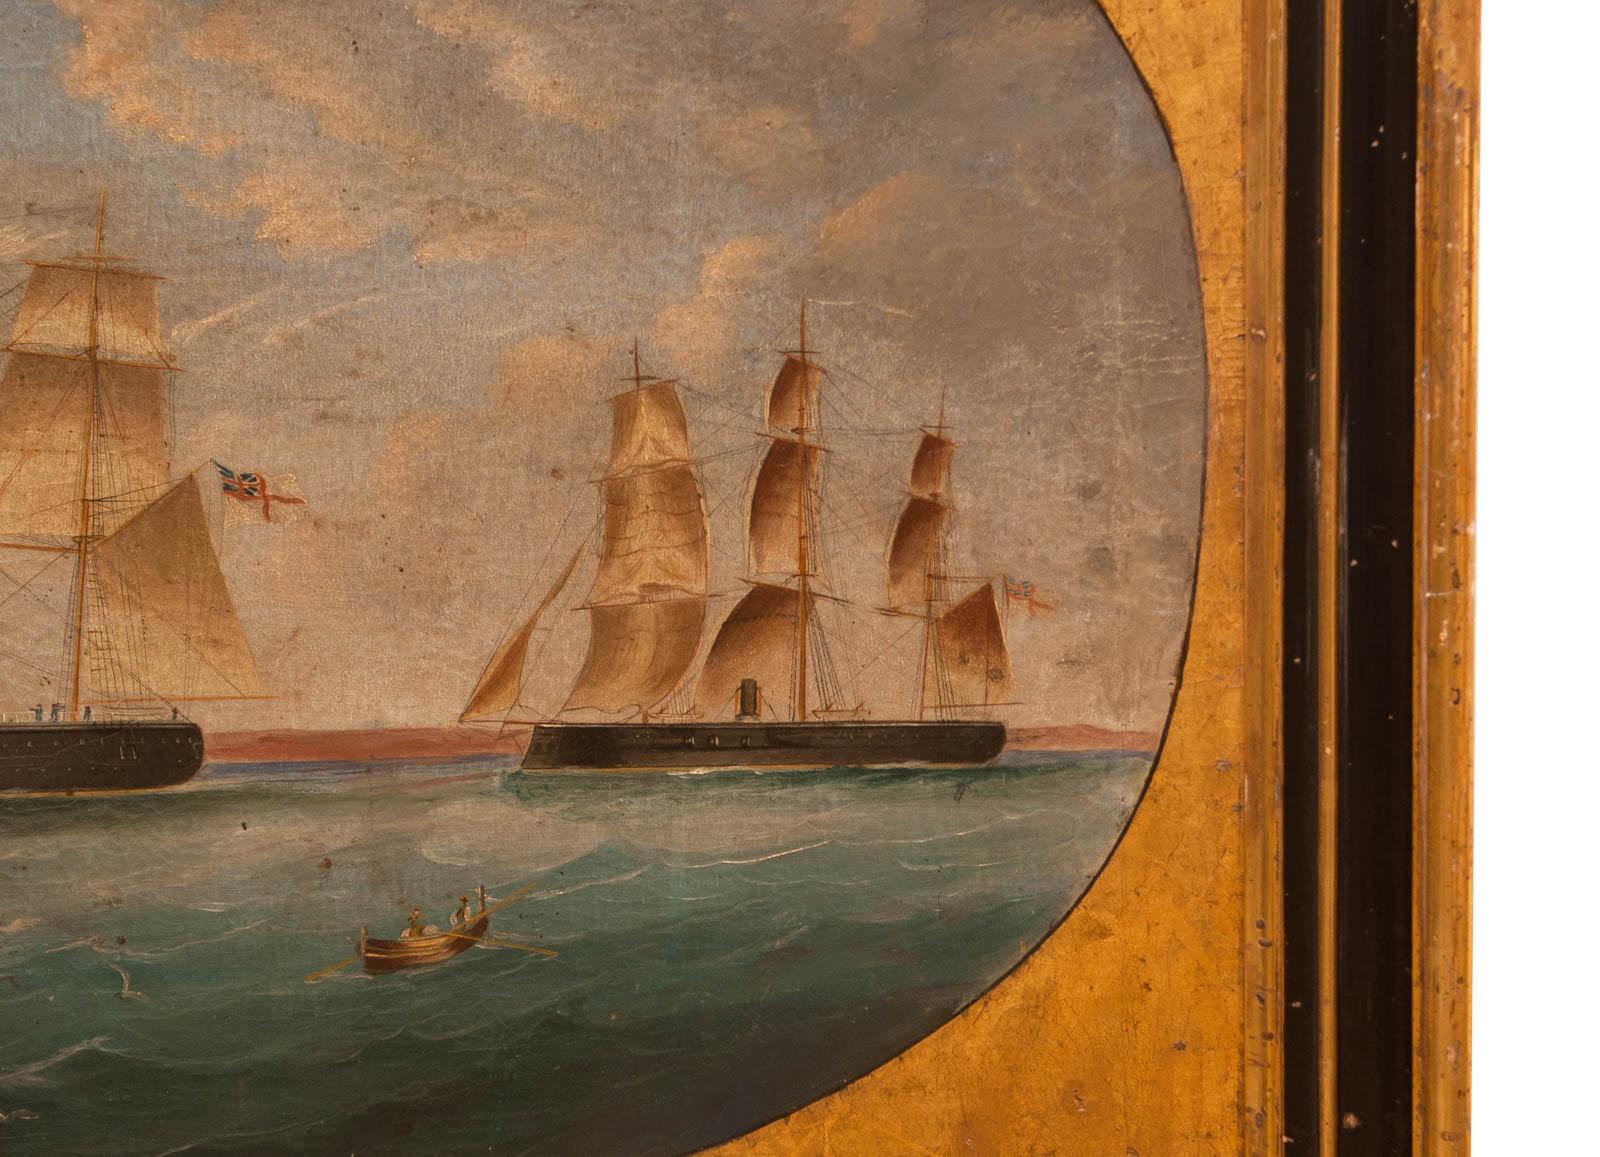 A nautical painting of two British ships with steam and sail power, England, late 19th century. Apparently unsigned and in an antique frame. Very nice detail with fairly rare transitional paintings of steam and sail powered large ships.

      